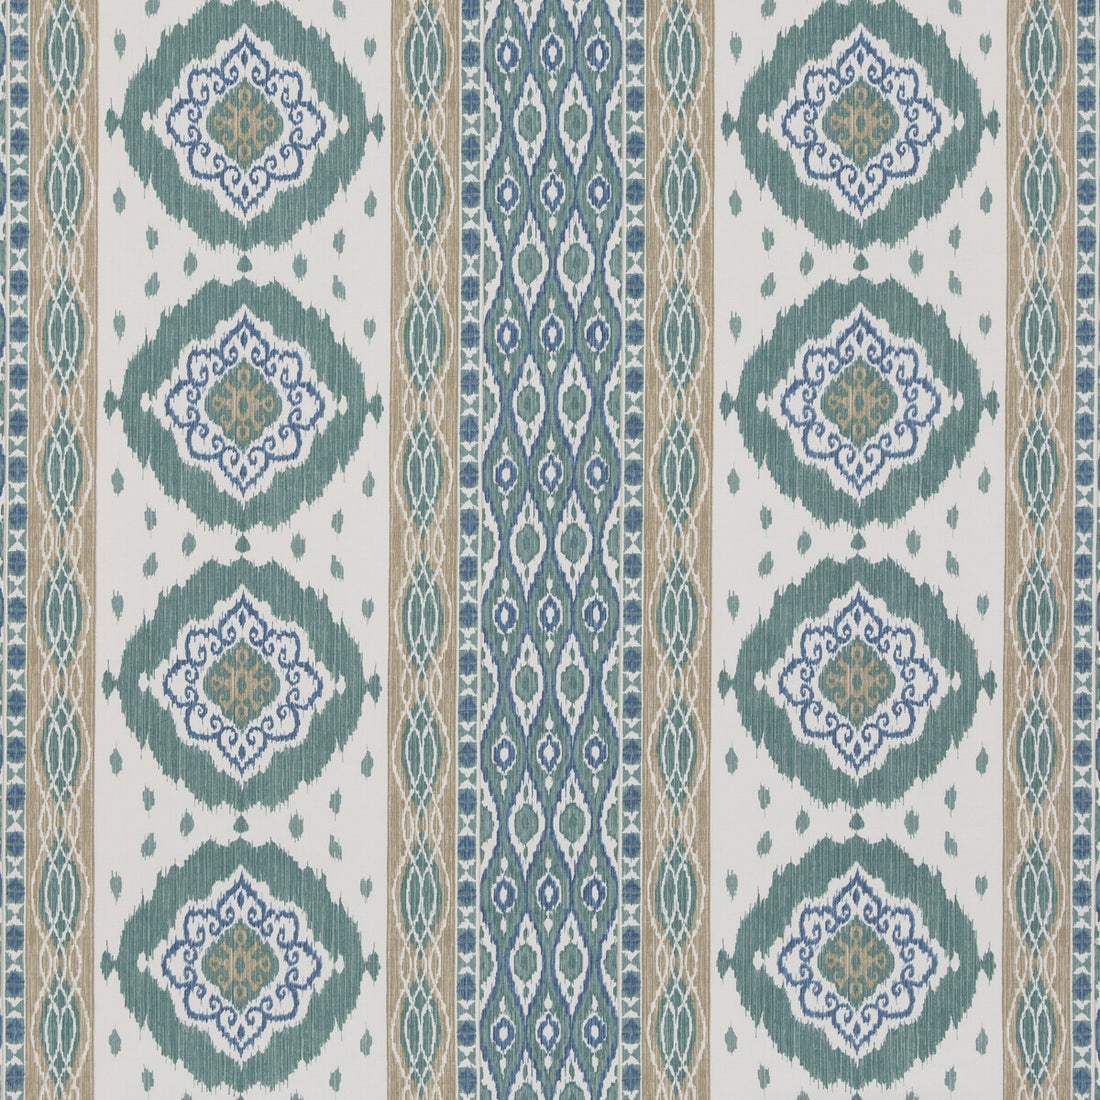 Crosby fabric in aqua color - pattern BP10936.4.0 - by G P &amp; J Baker in the Caspian collection